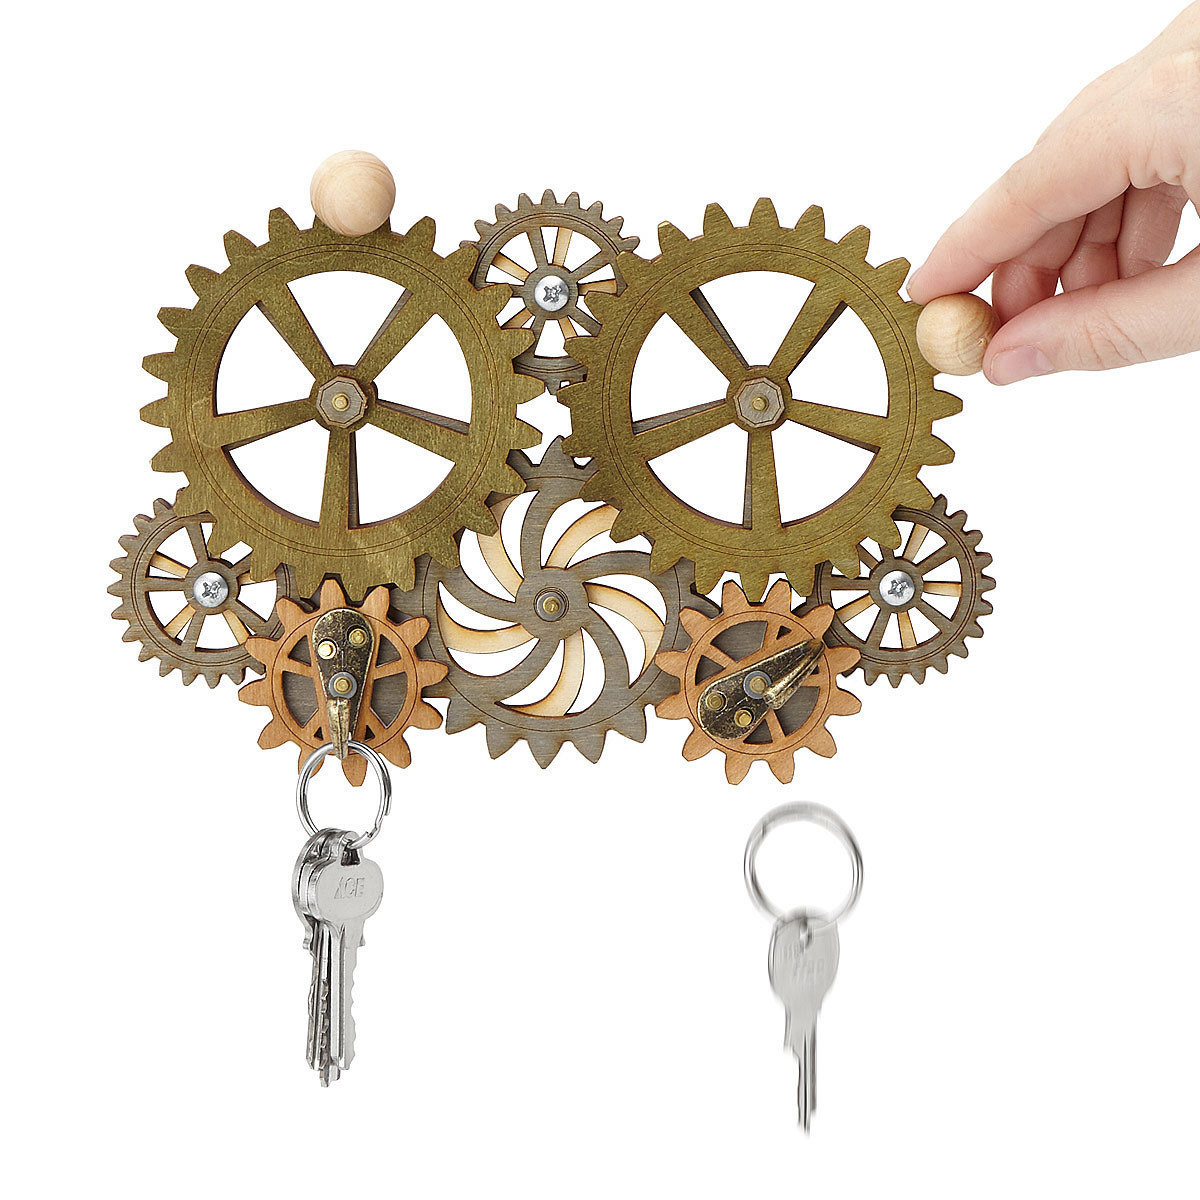 The Kinetic Gear Key Holder is perfect for anyone who likes a little bit of steampunk in their lives. Even if you're not a steampunk-type, you can't deny how neat this design is.